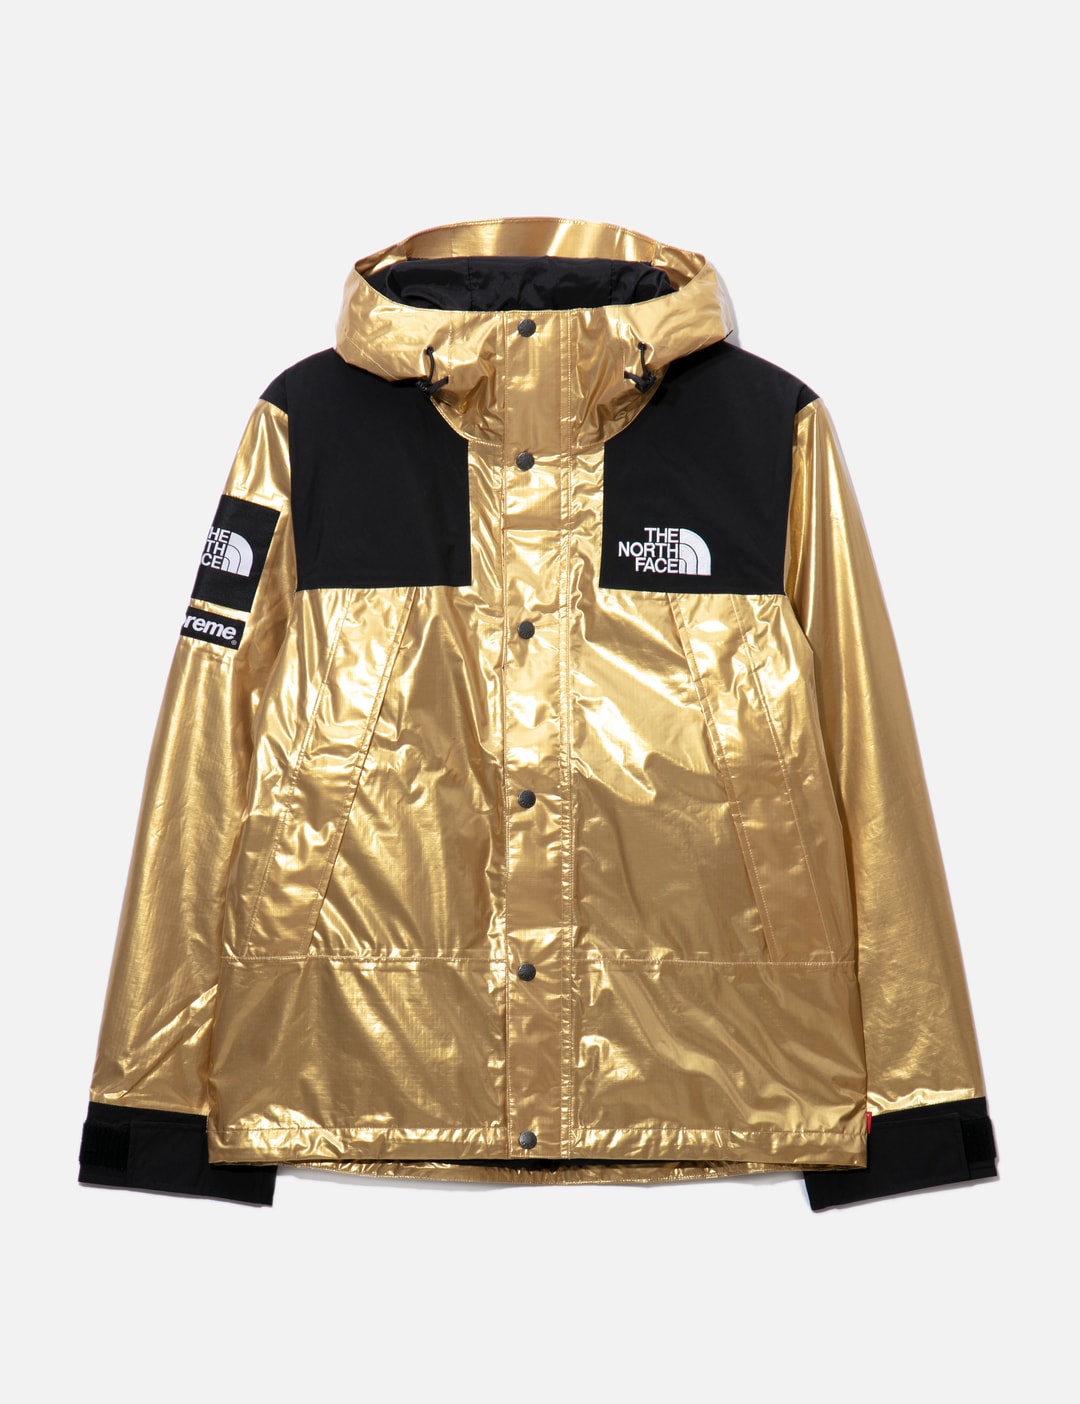 Took a W on The North Face x Supreme Mountain Jacket yesterday, as